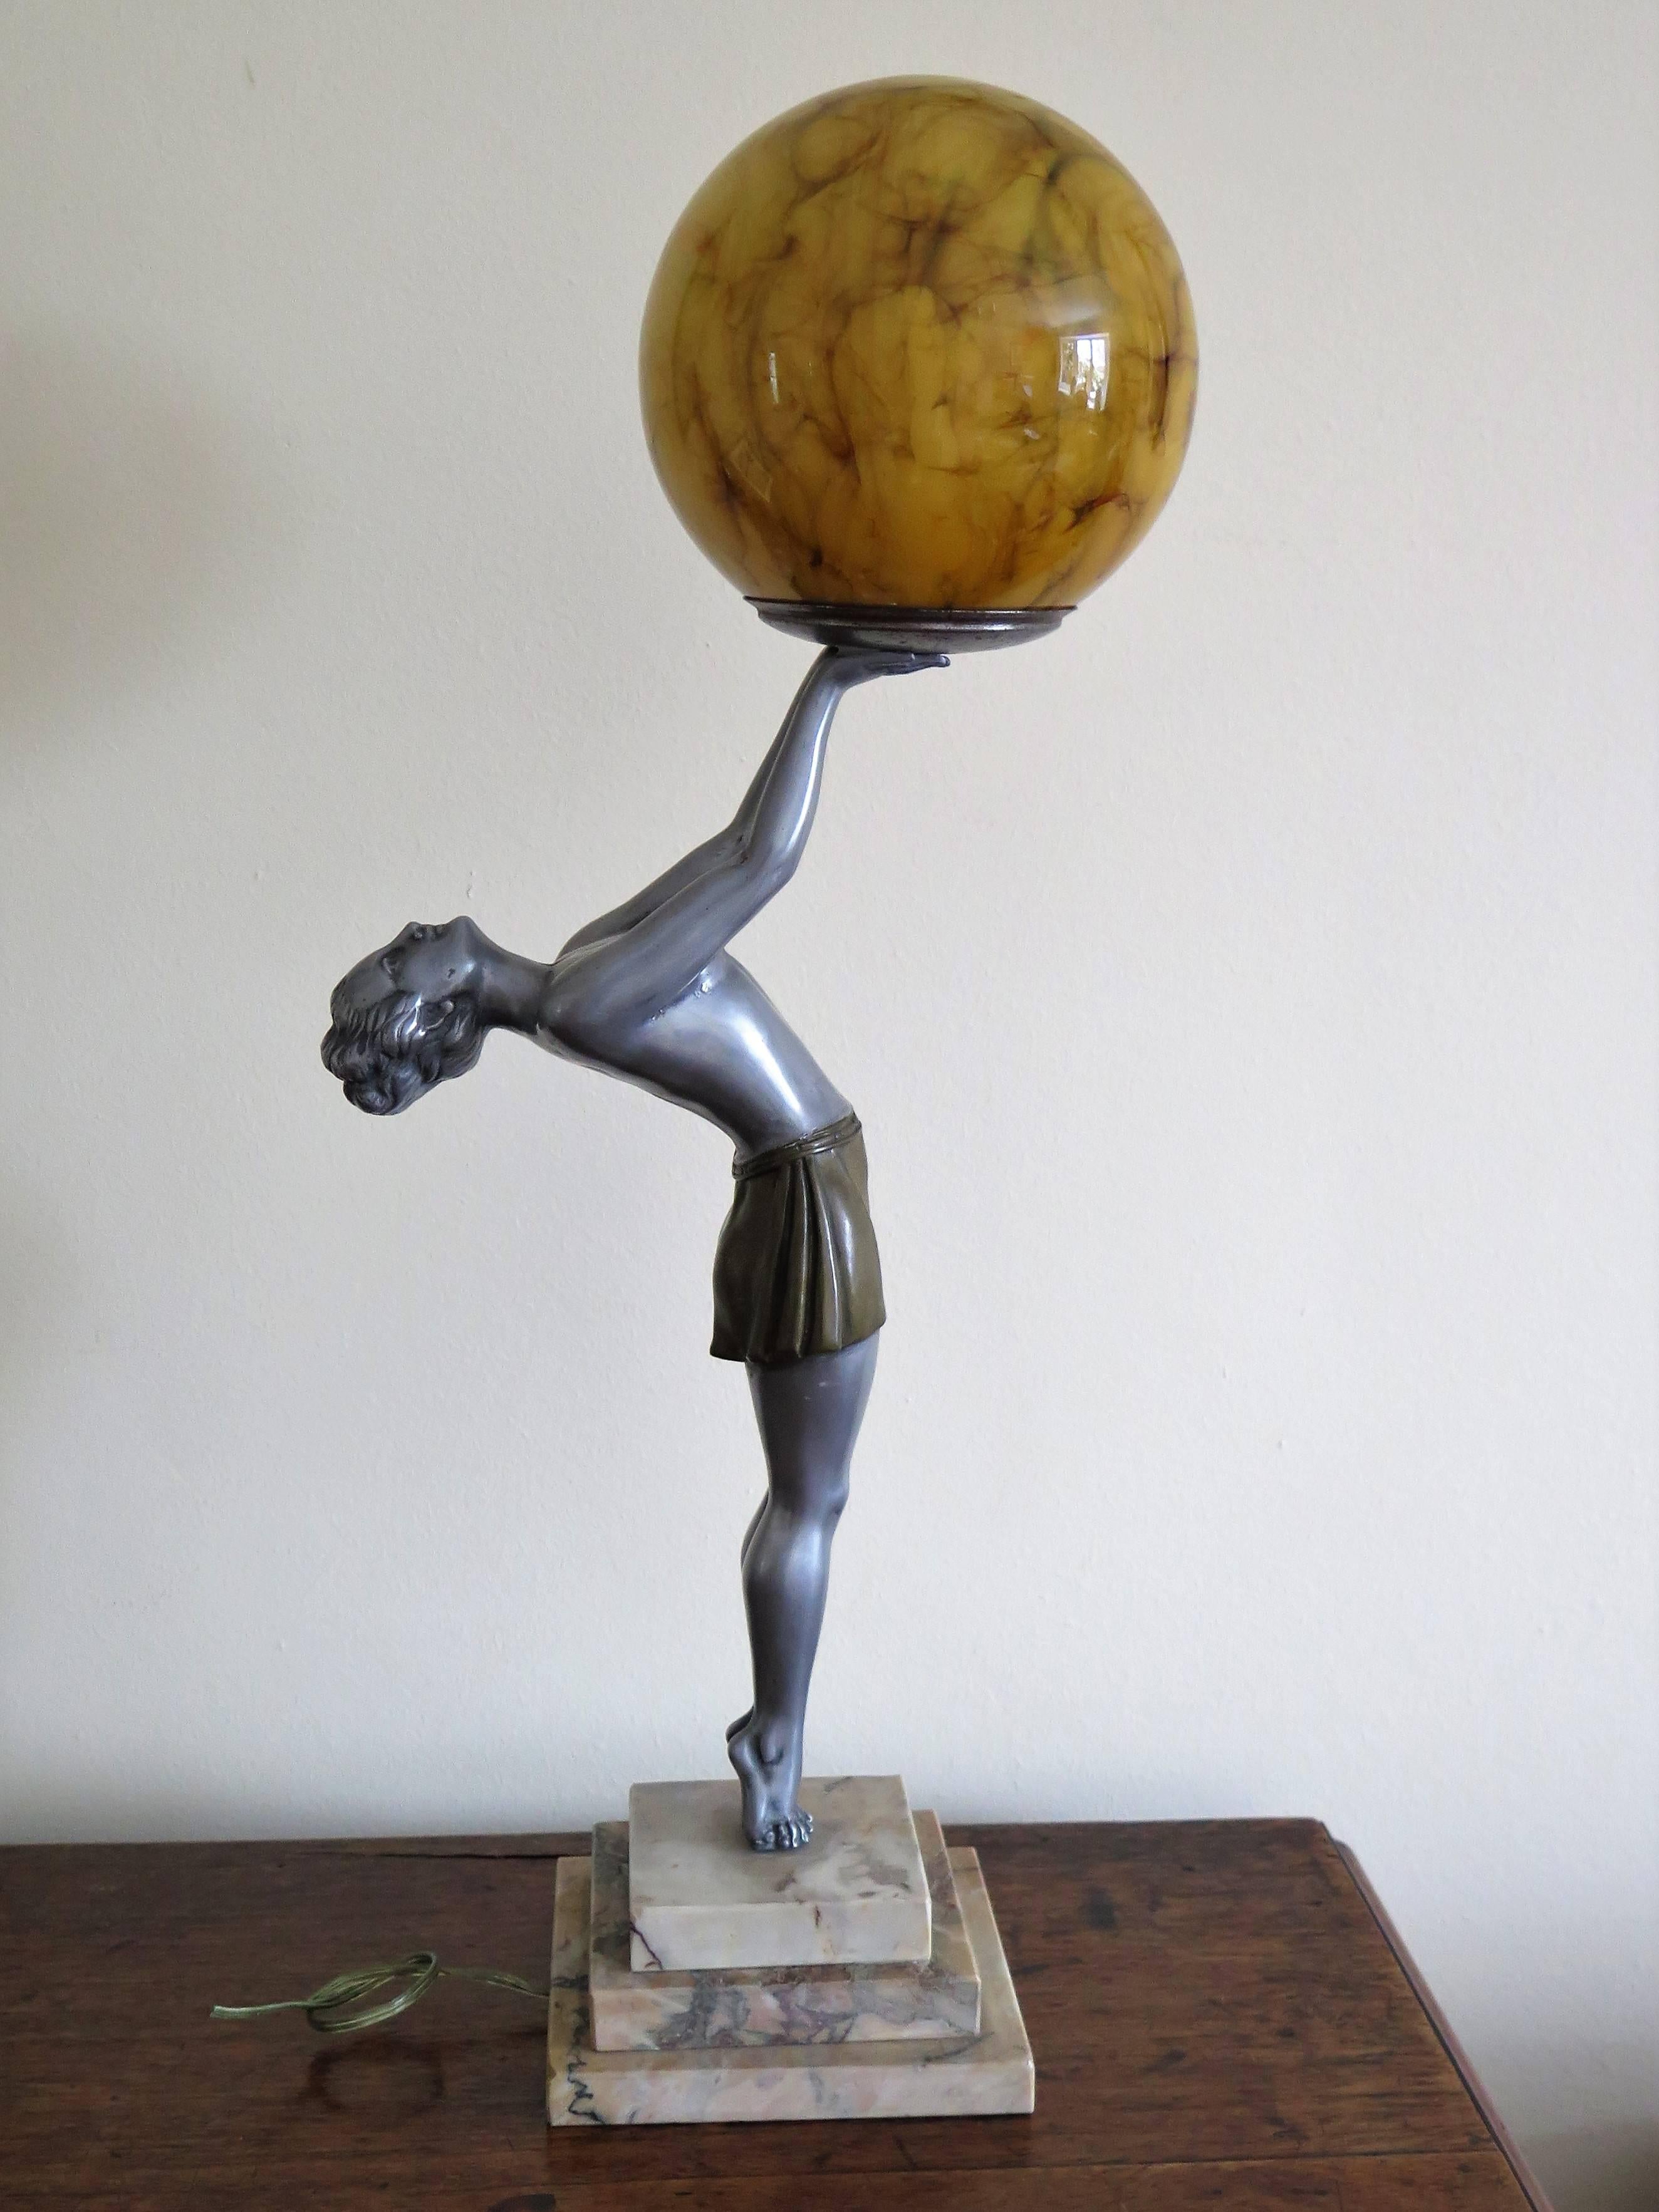 This is a stunning figurine table lamp of the Biba lamp girl after Max Le-Verrier (1891-1973), who was a famous French sculptor, based in Paris.

The figurine is made of a silvered bronze metal, with a gold colored, cold-painted skirt. 

The piece